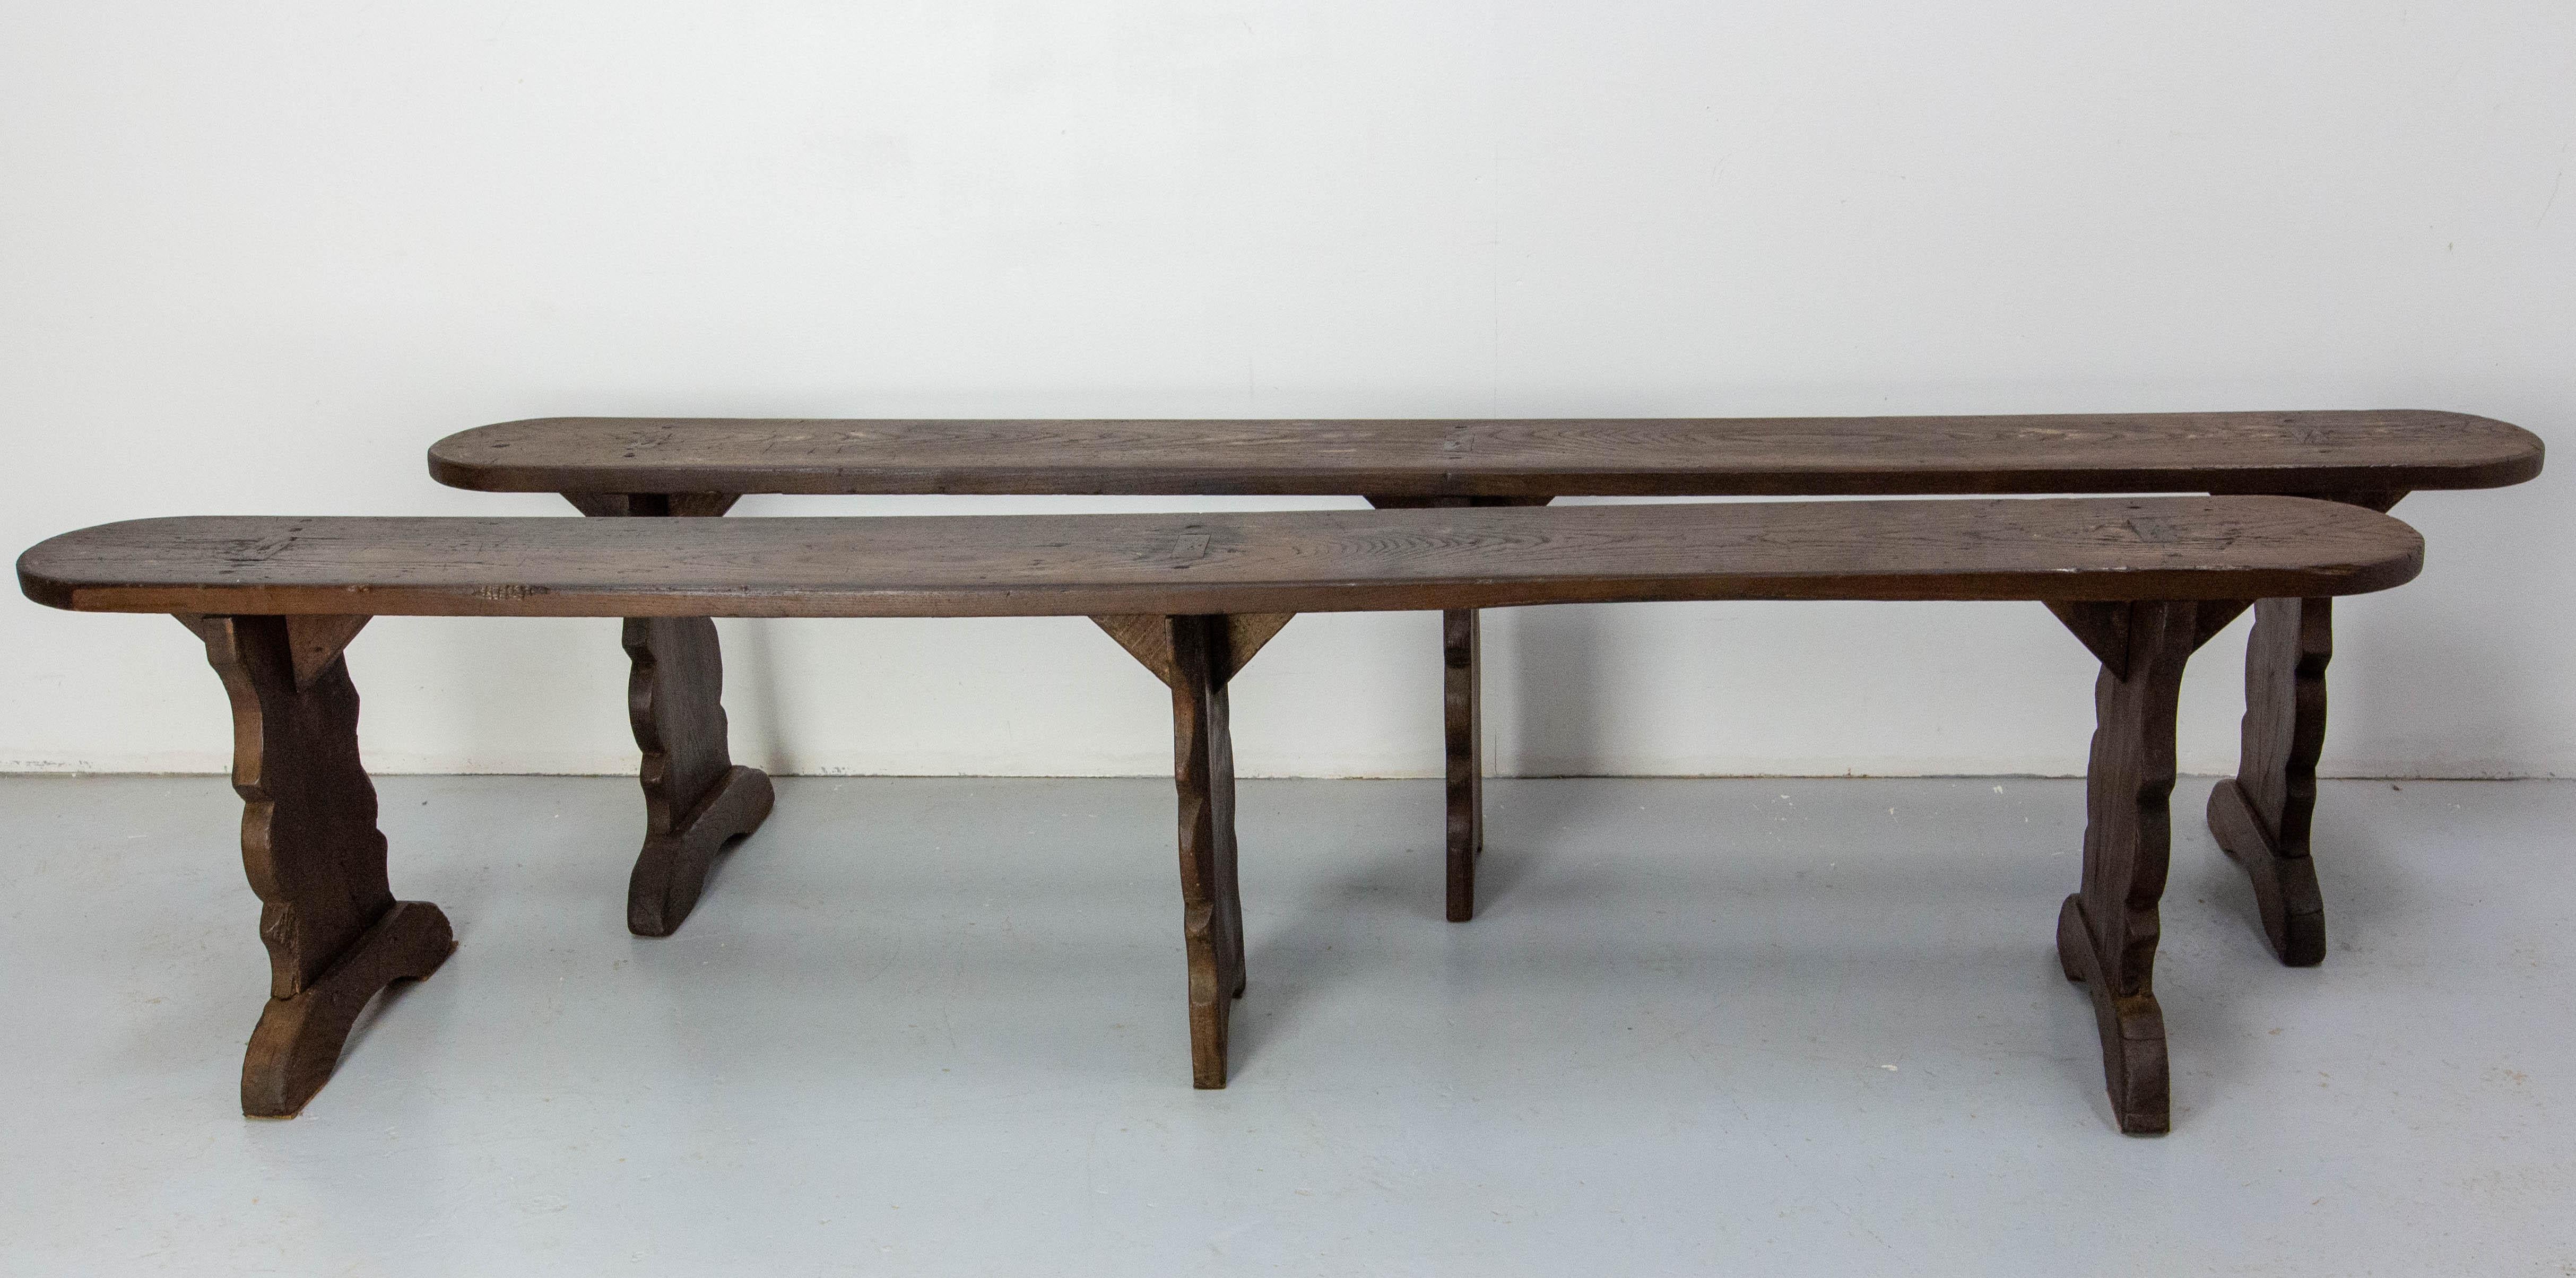 French pair of antique benches made circa 1900.
Farmhouse style
In original antique condition sound and solid.


Shipping:
226/ 39 / 51 cm 25kg 